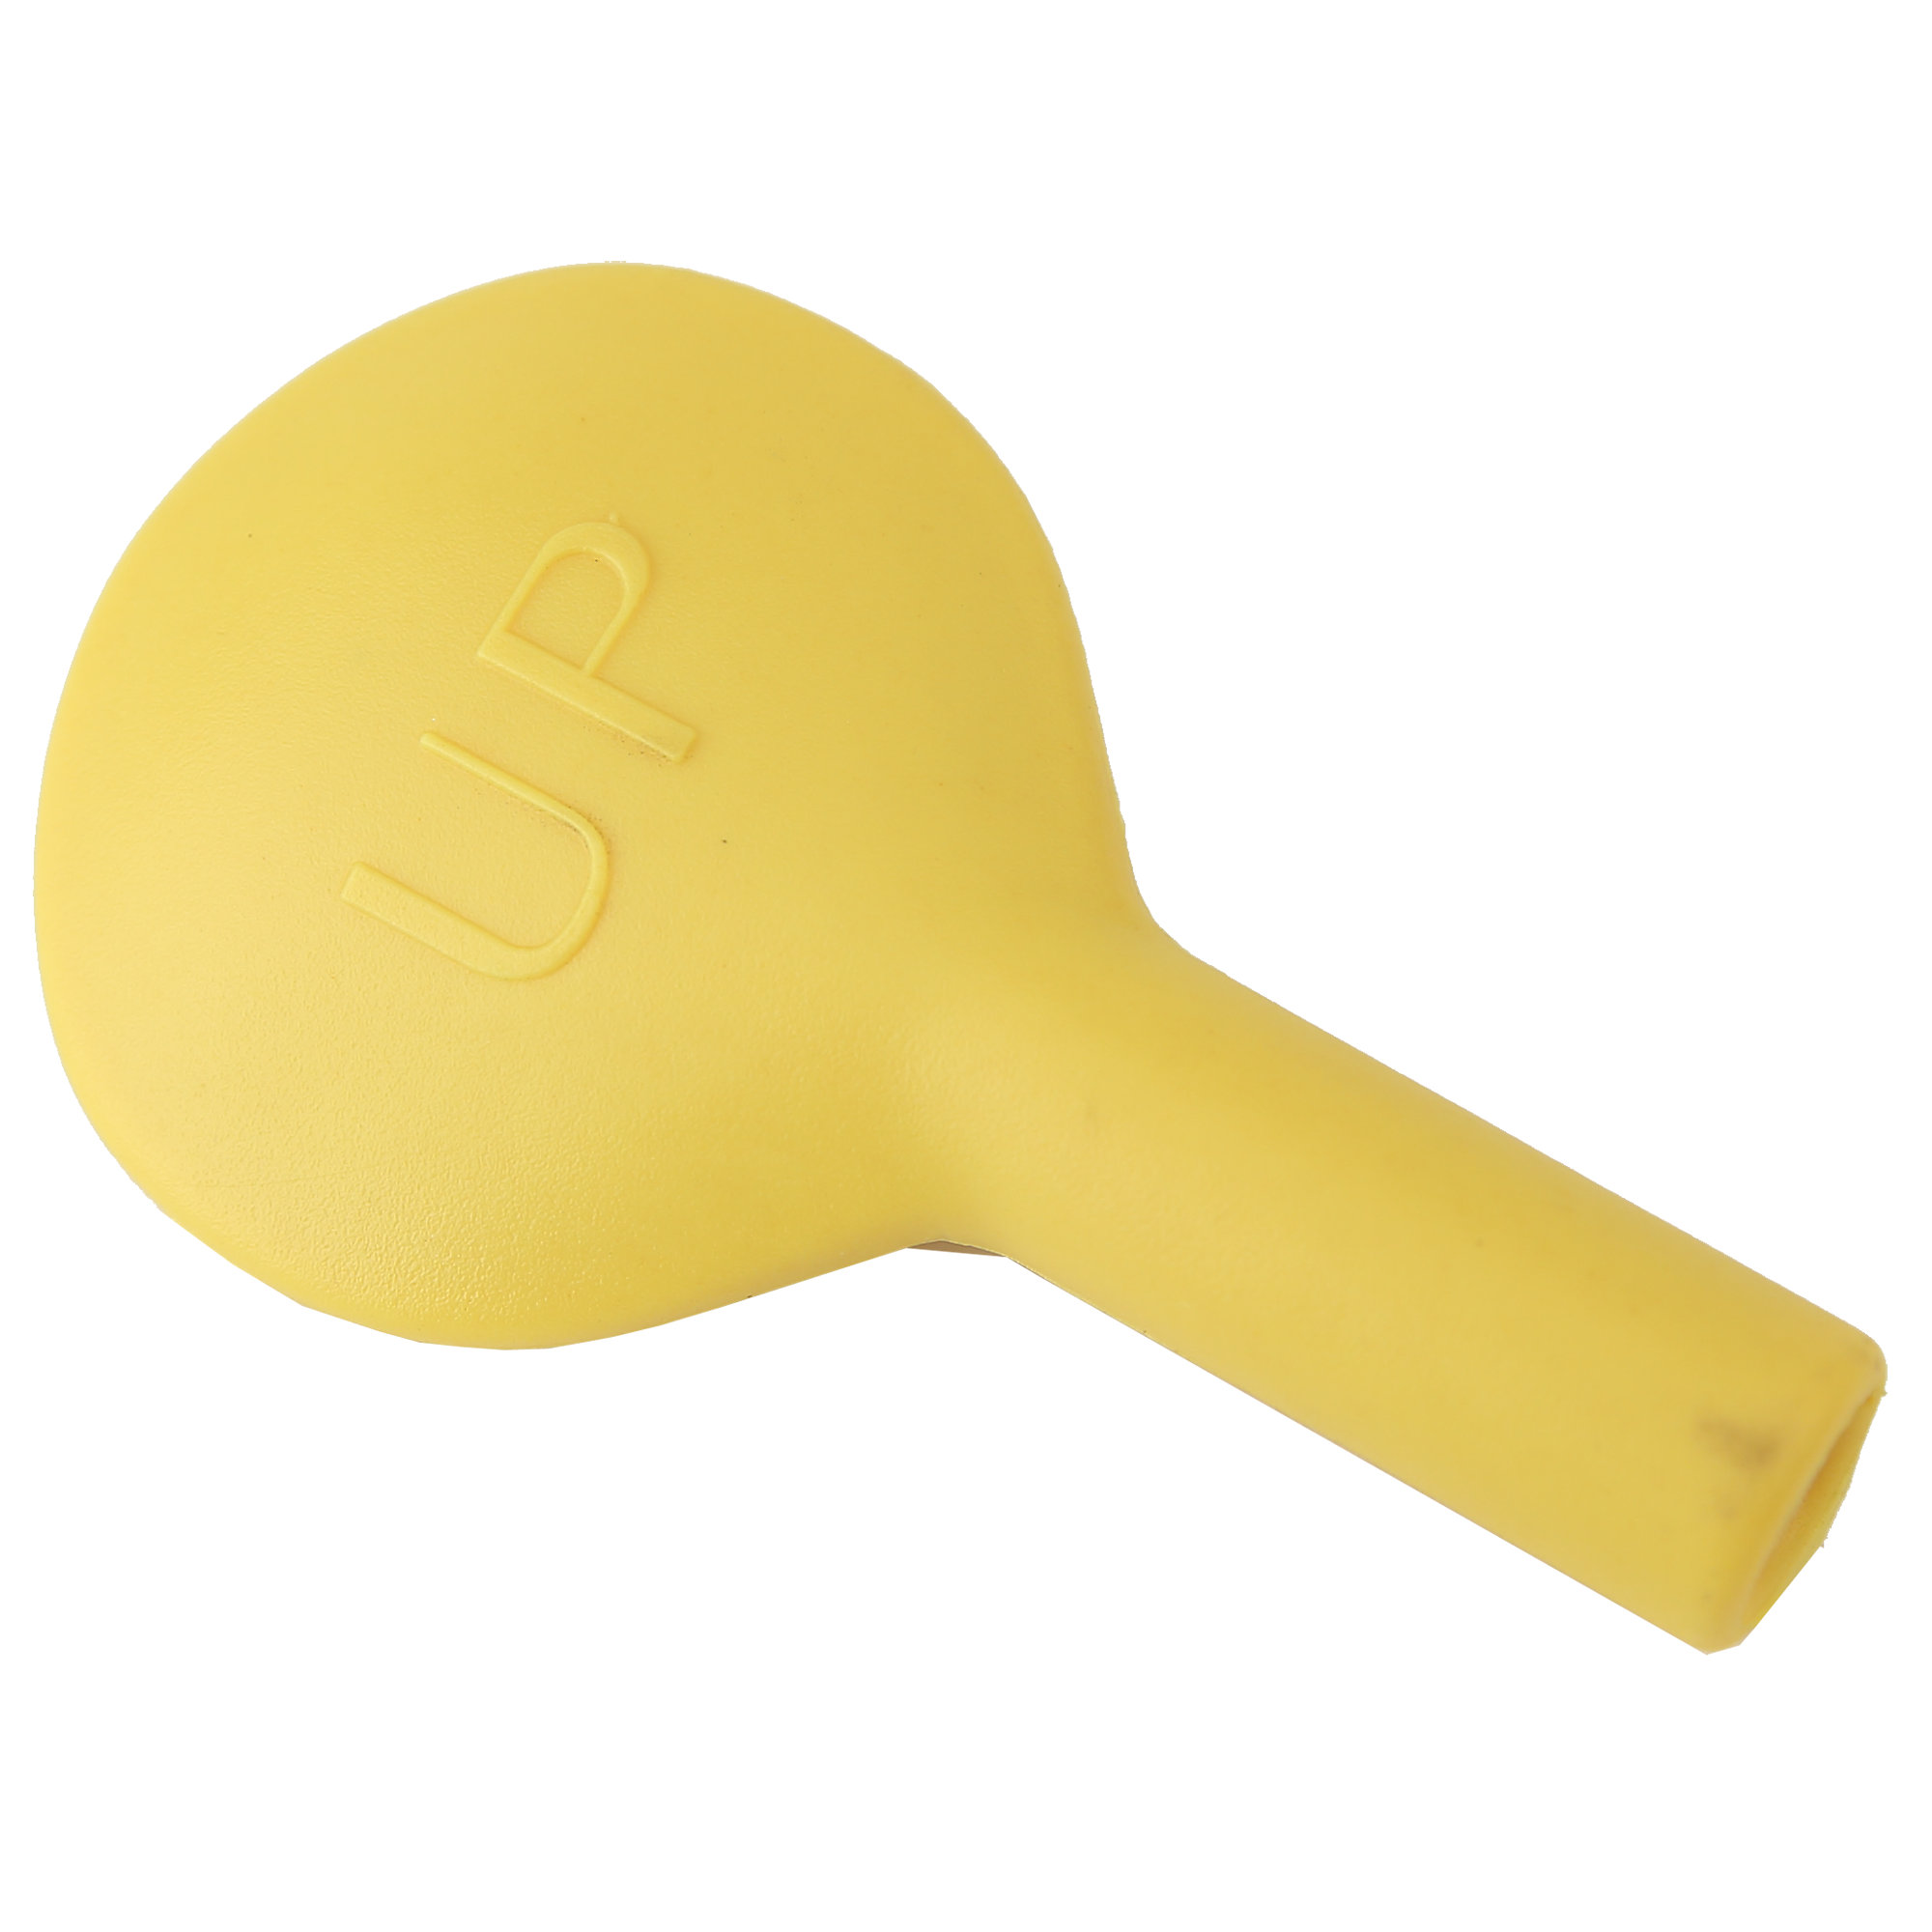 Handle Ovl Seatpost Yellow, Scifit